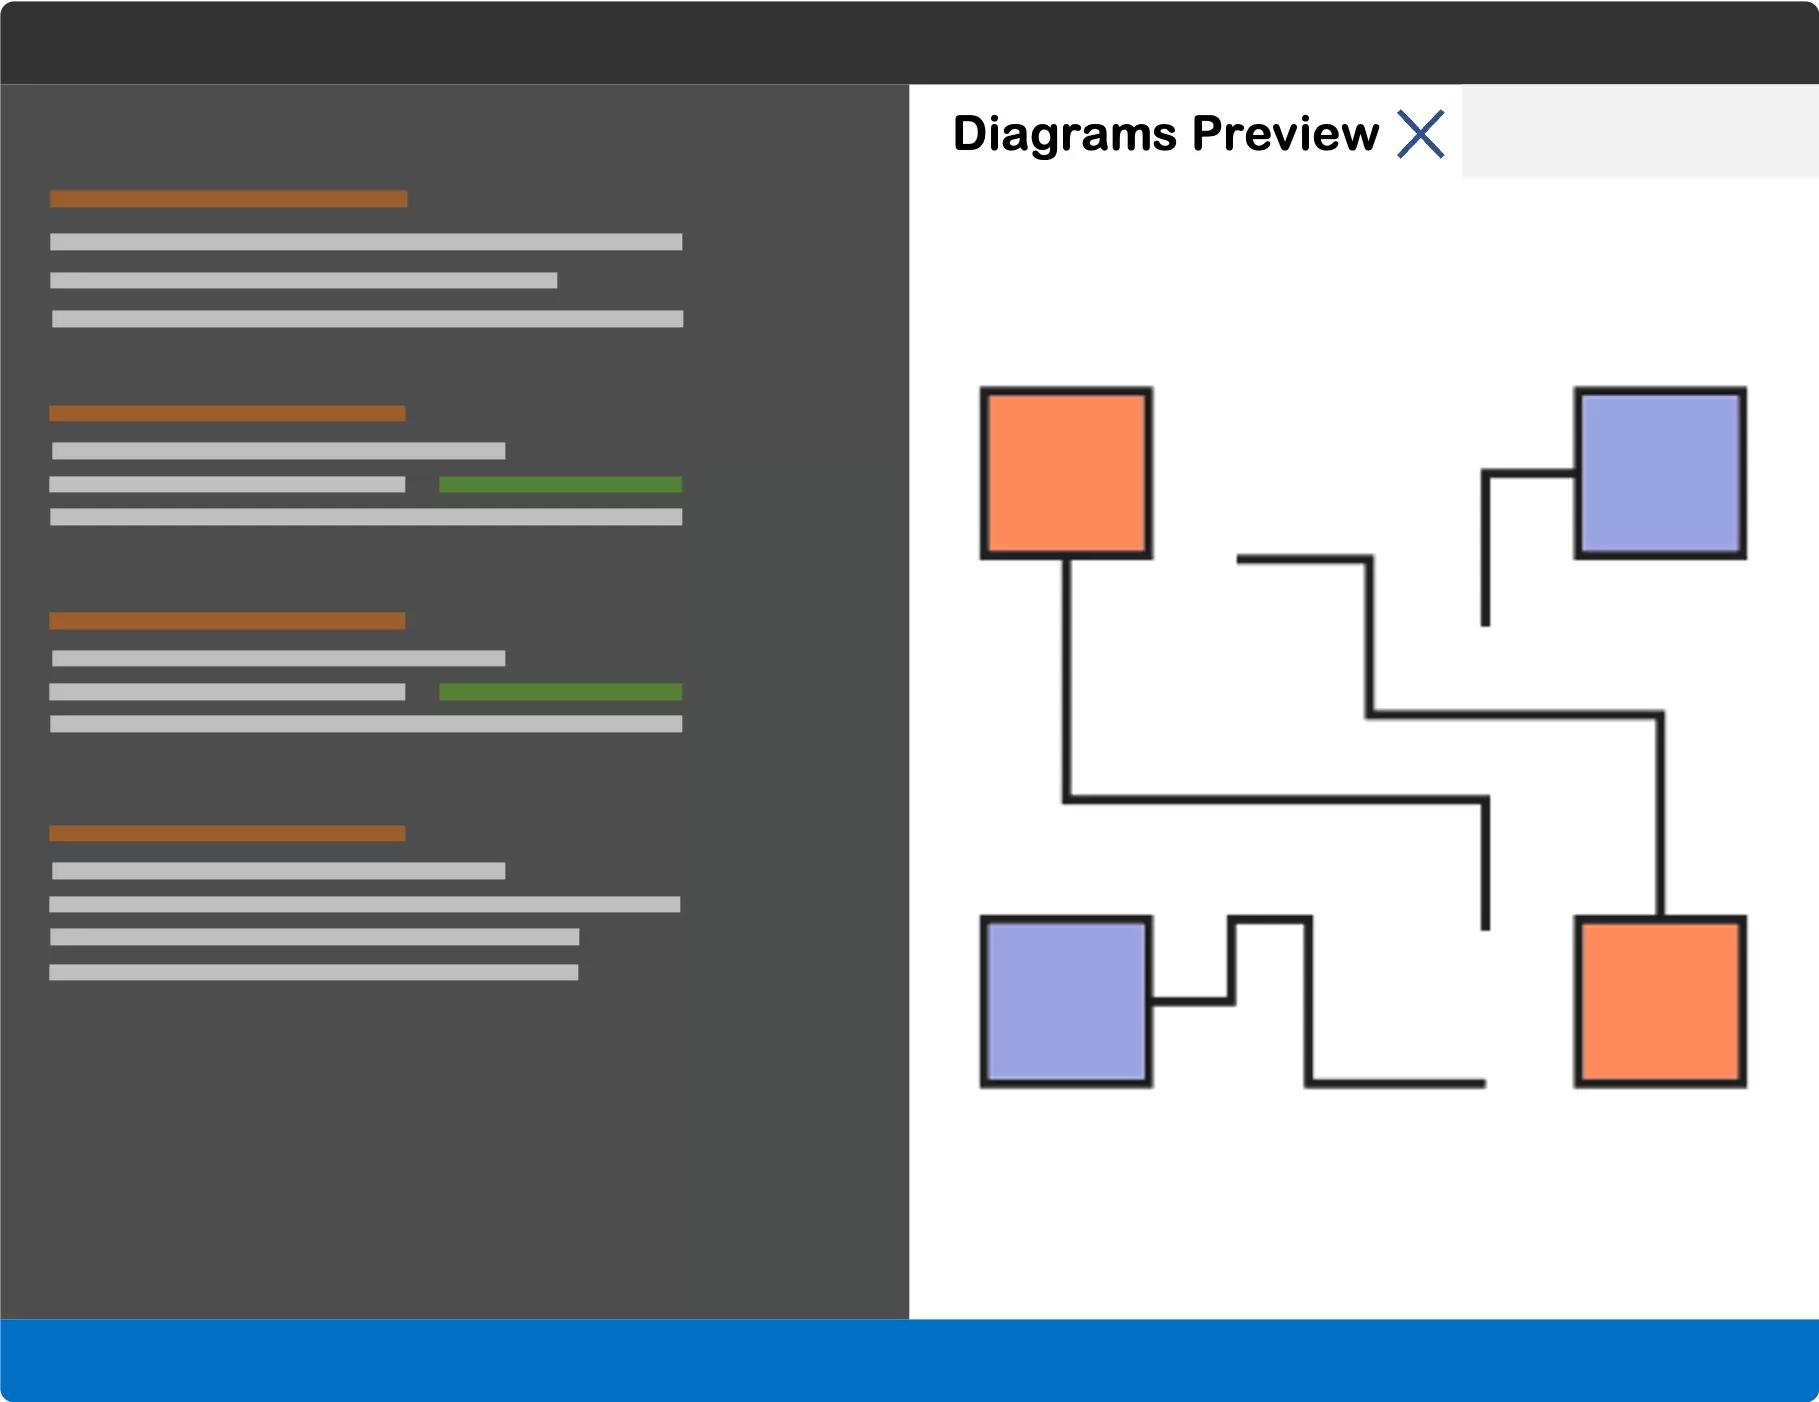 Diagrams Previewer